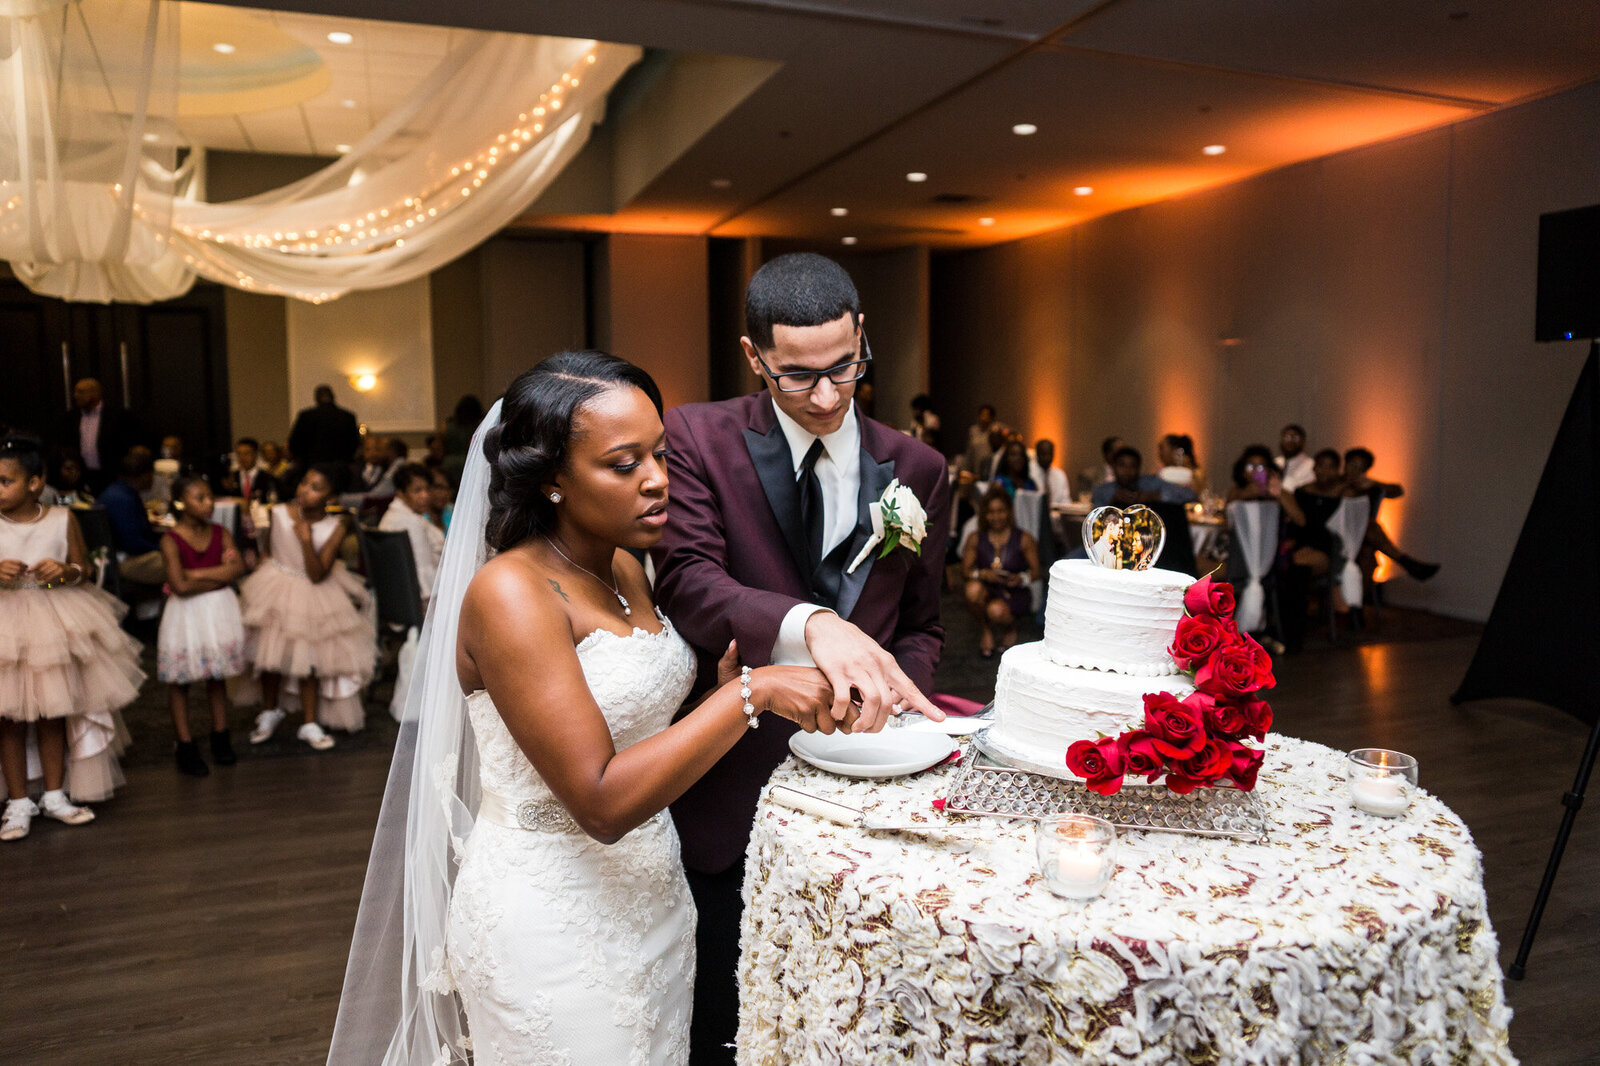 Newly wedded couple cutting their two-tiered white cake